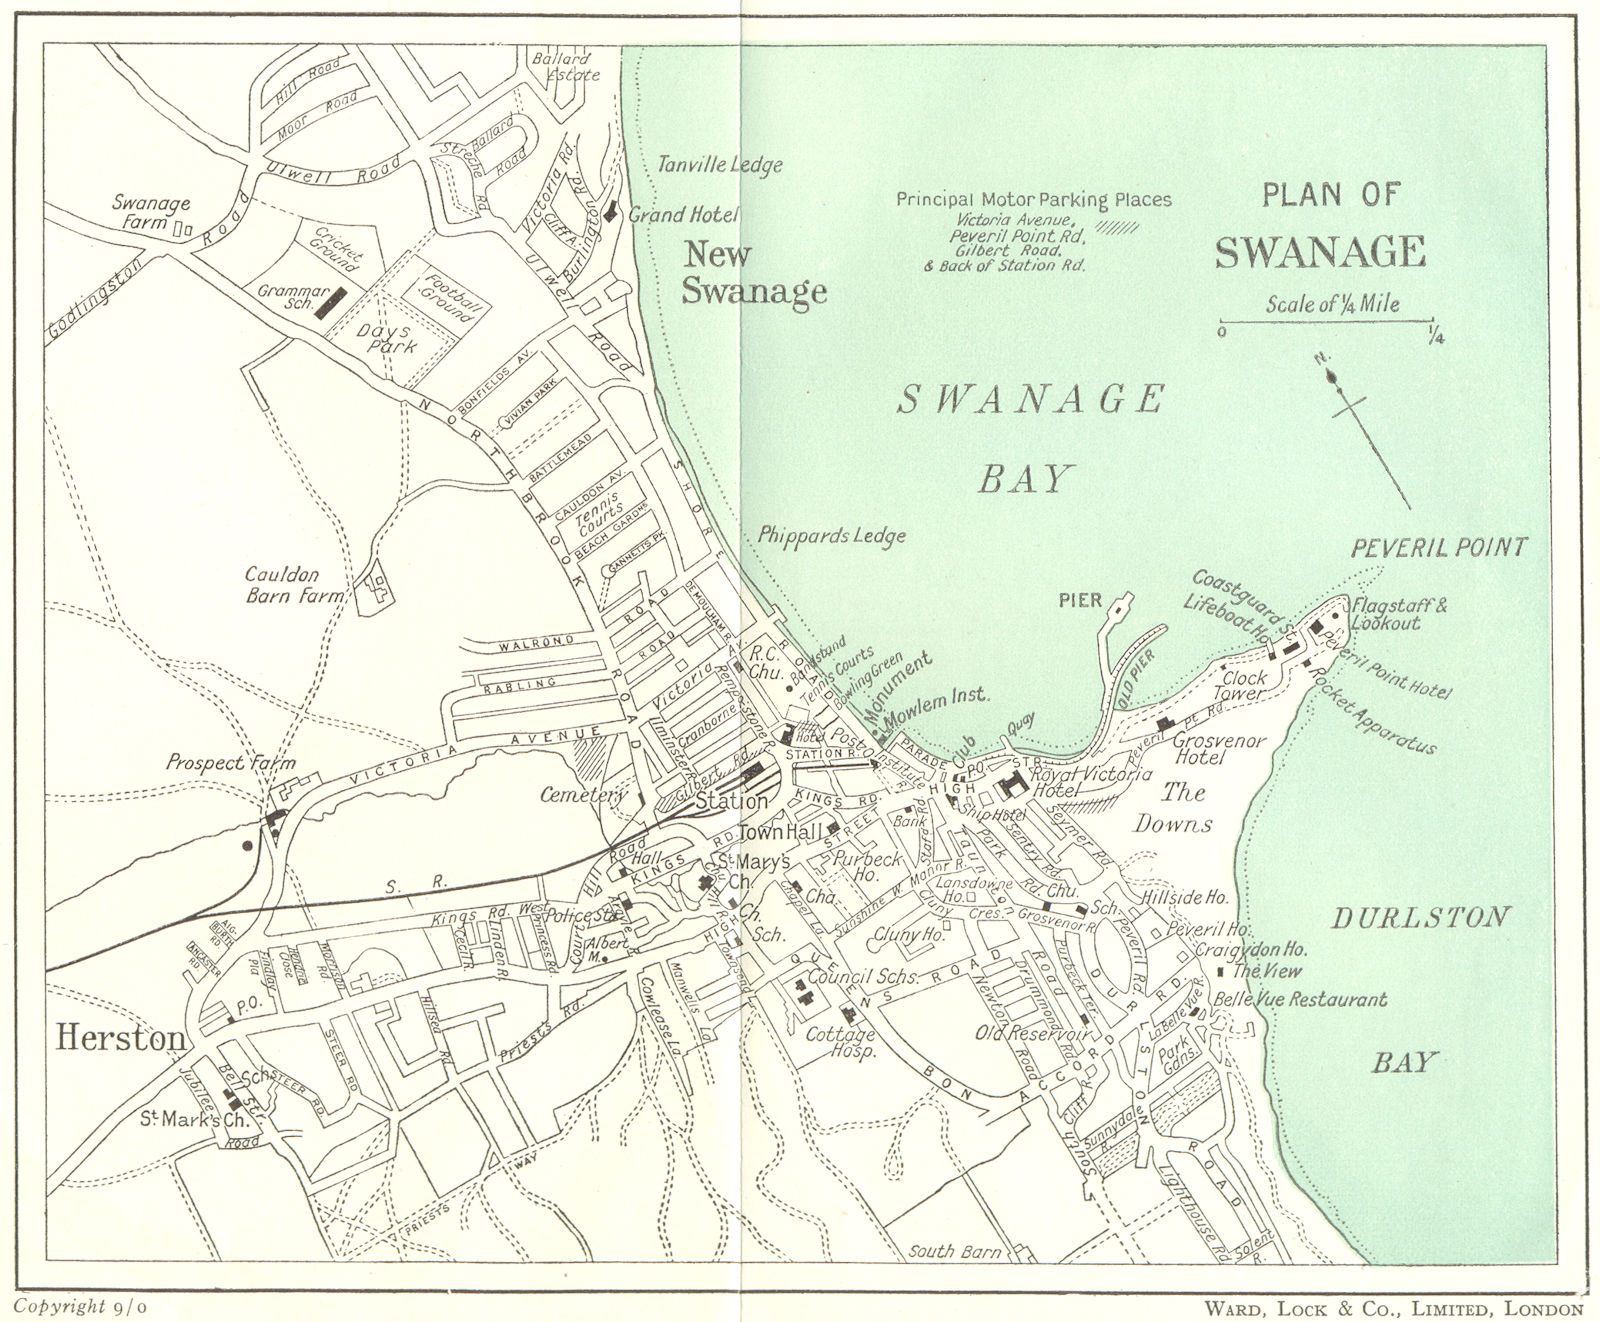 Associate Product SWANAGE vintage town/city plan. Dorset. WARD LOCK 1950 old vintage map chart